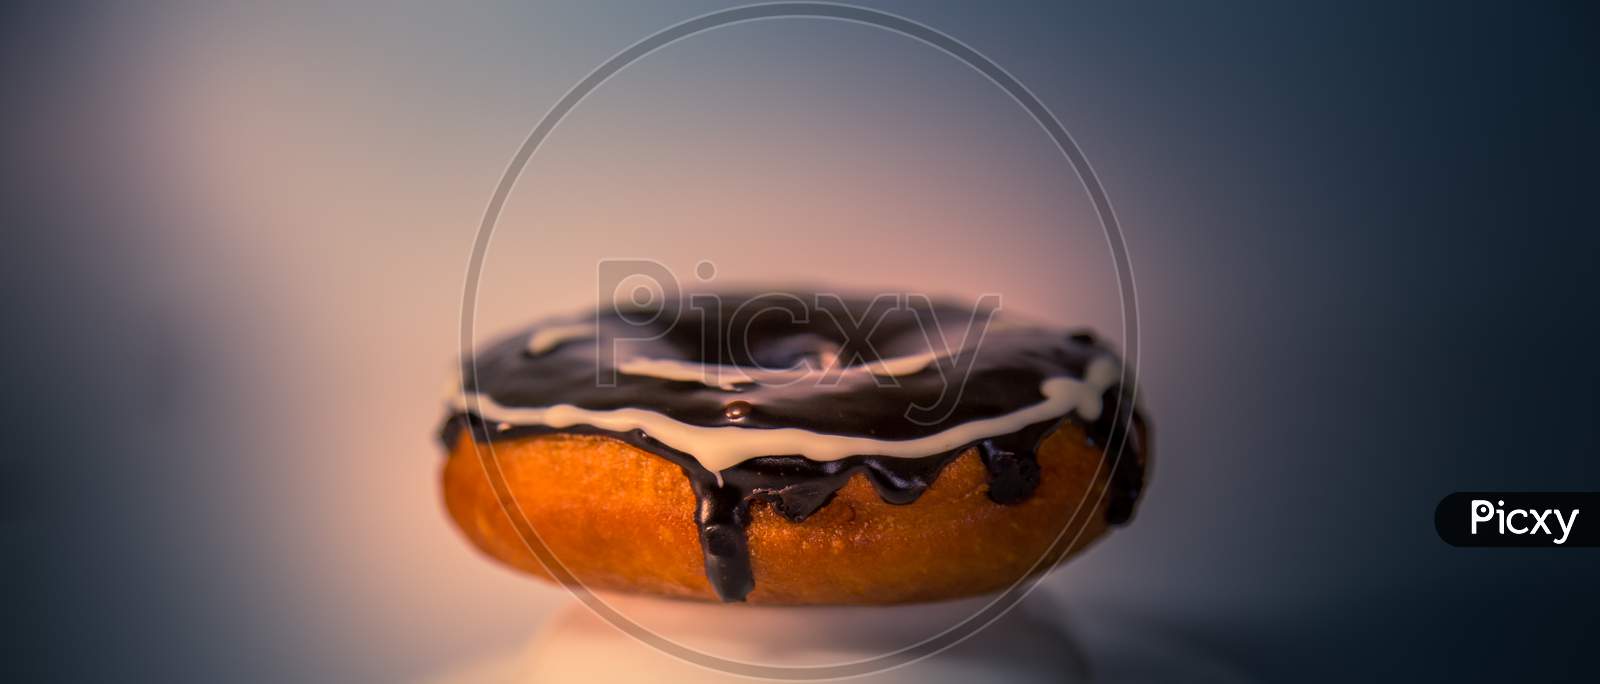 Assorted Donuts With Dark Chocolate Frosted And White Design Chocolate On It